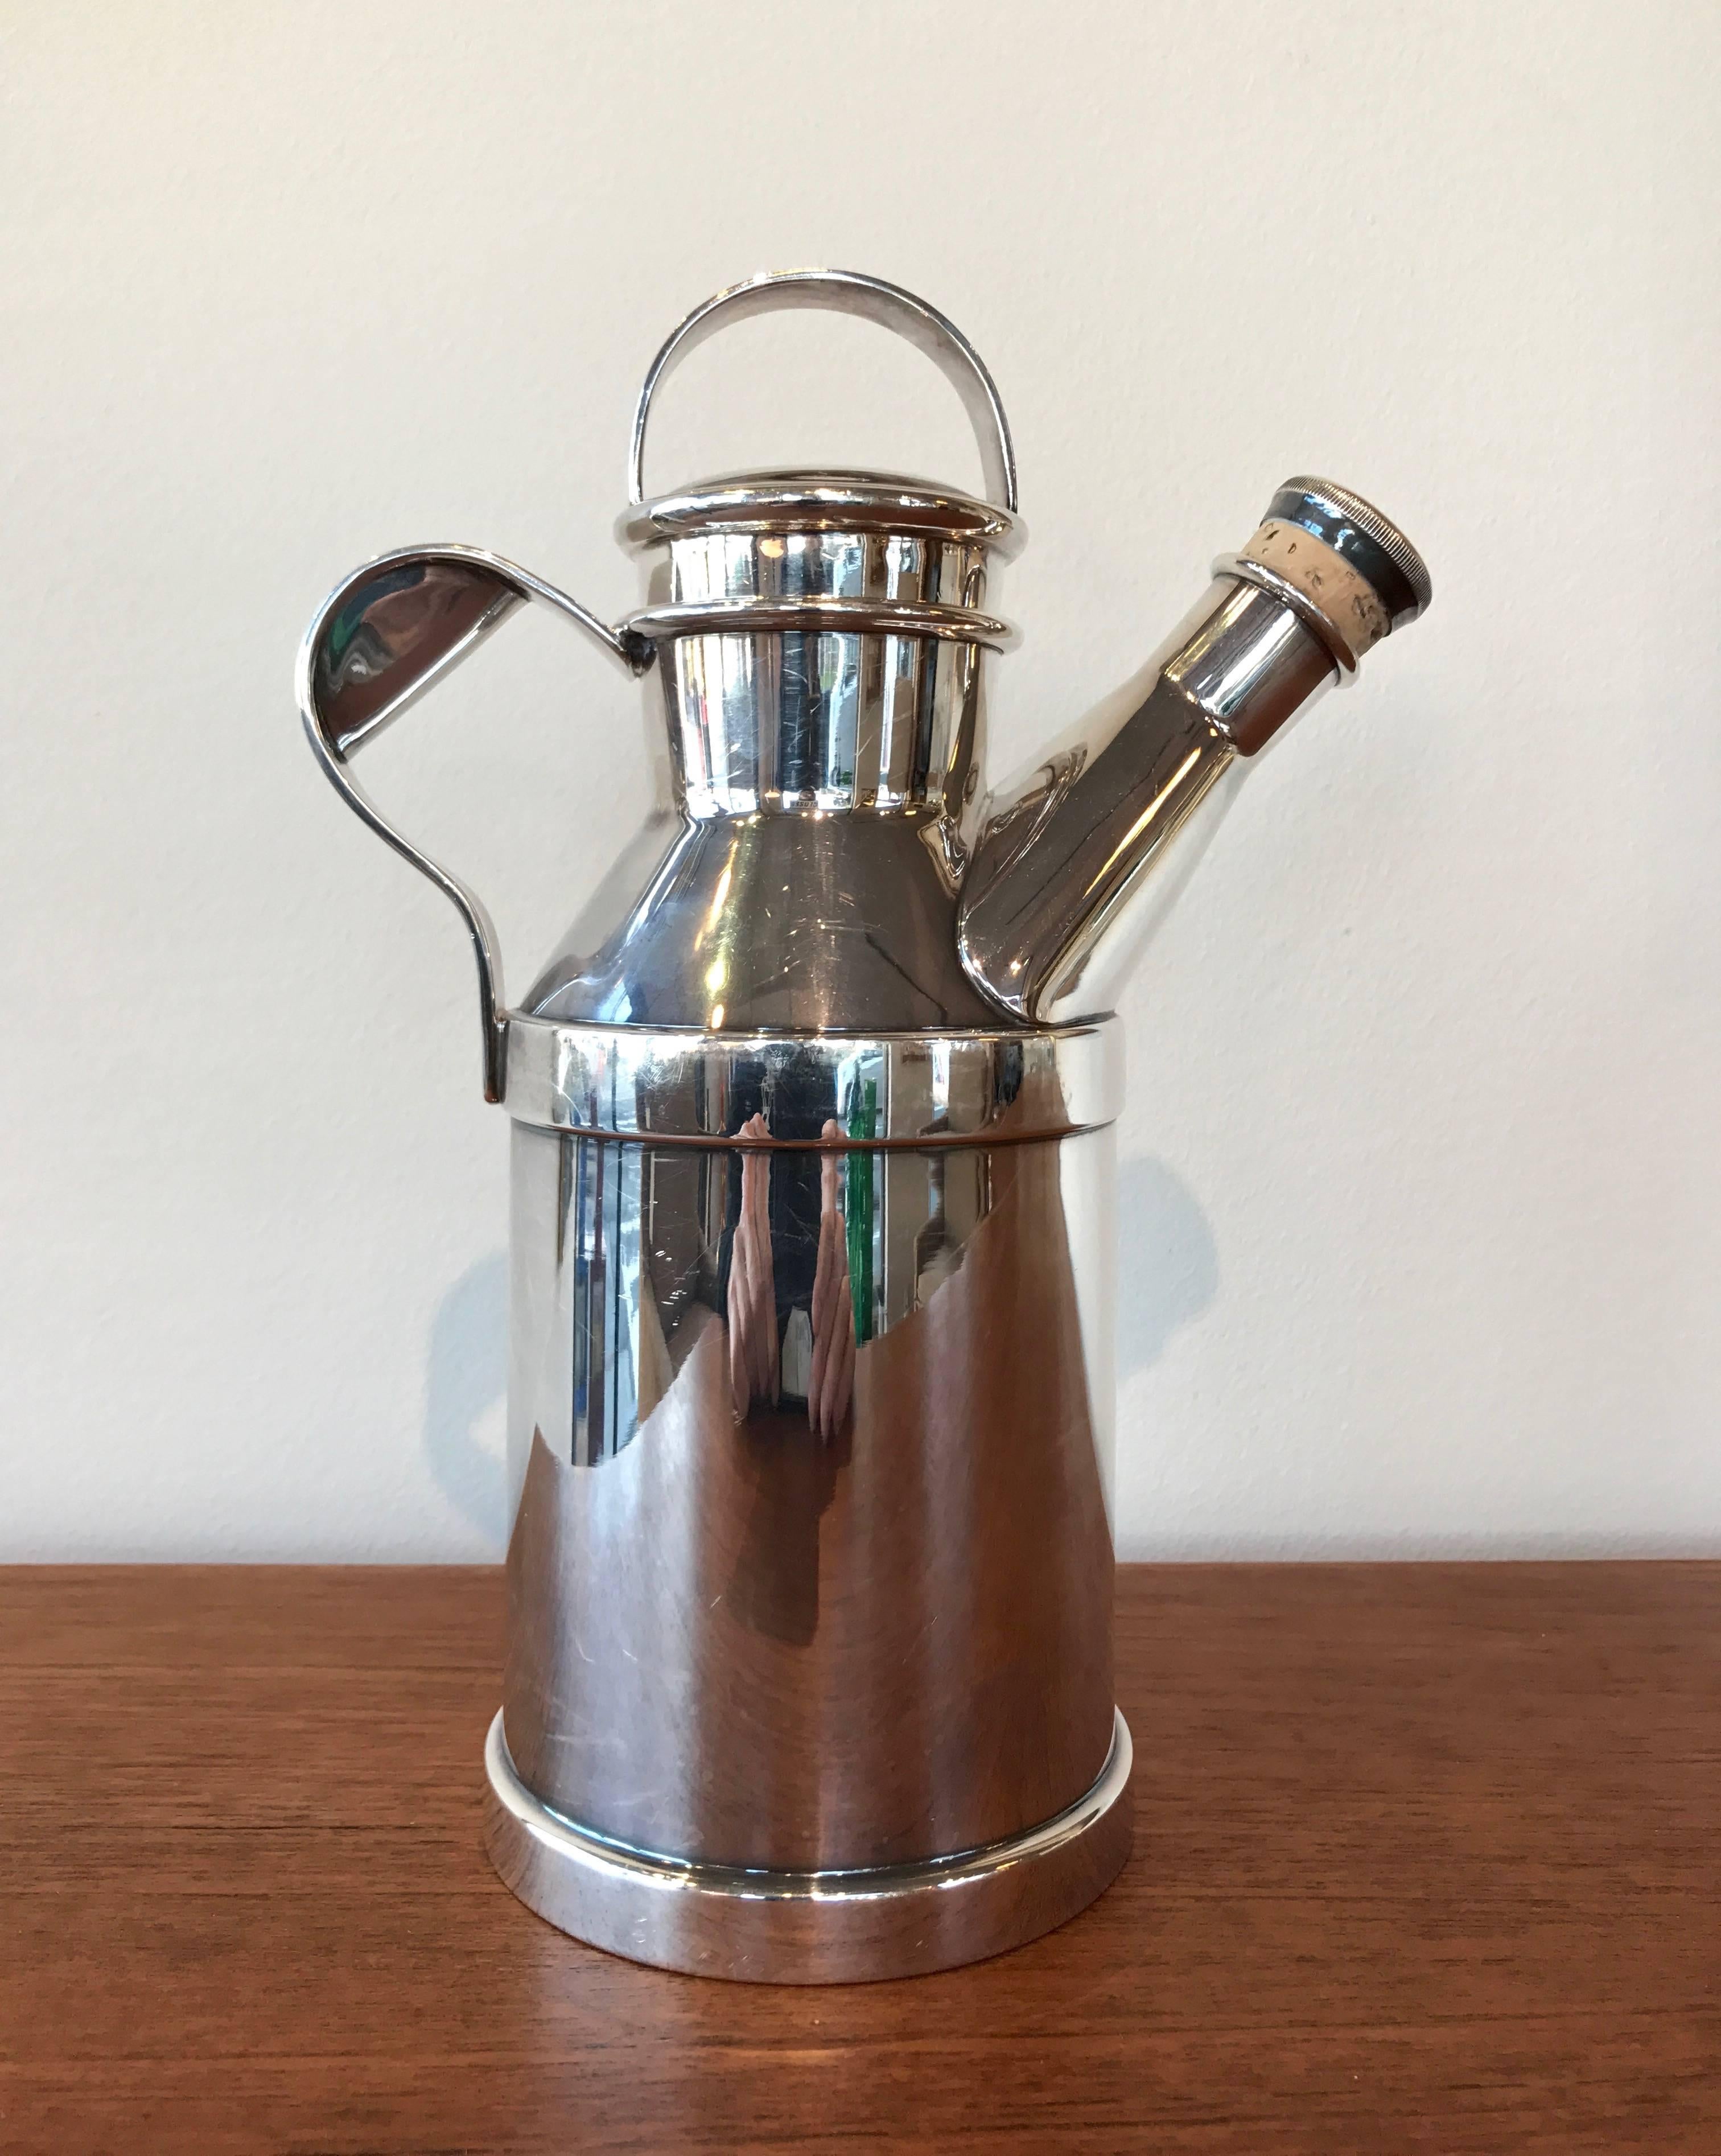 A 32 oz. silver plate “Milk Jug” cocktail Shaker by Reed & Barton. This highly sought-after Shaker features a delightful design reminiscent of a milk jug or gas or oil can. Features two stoppers, the smaller of which retains its original cork in